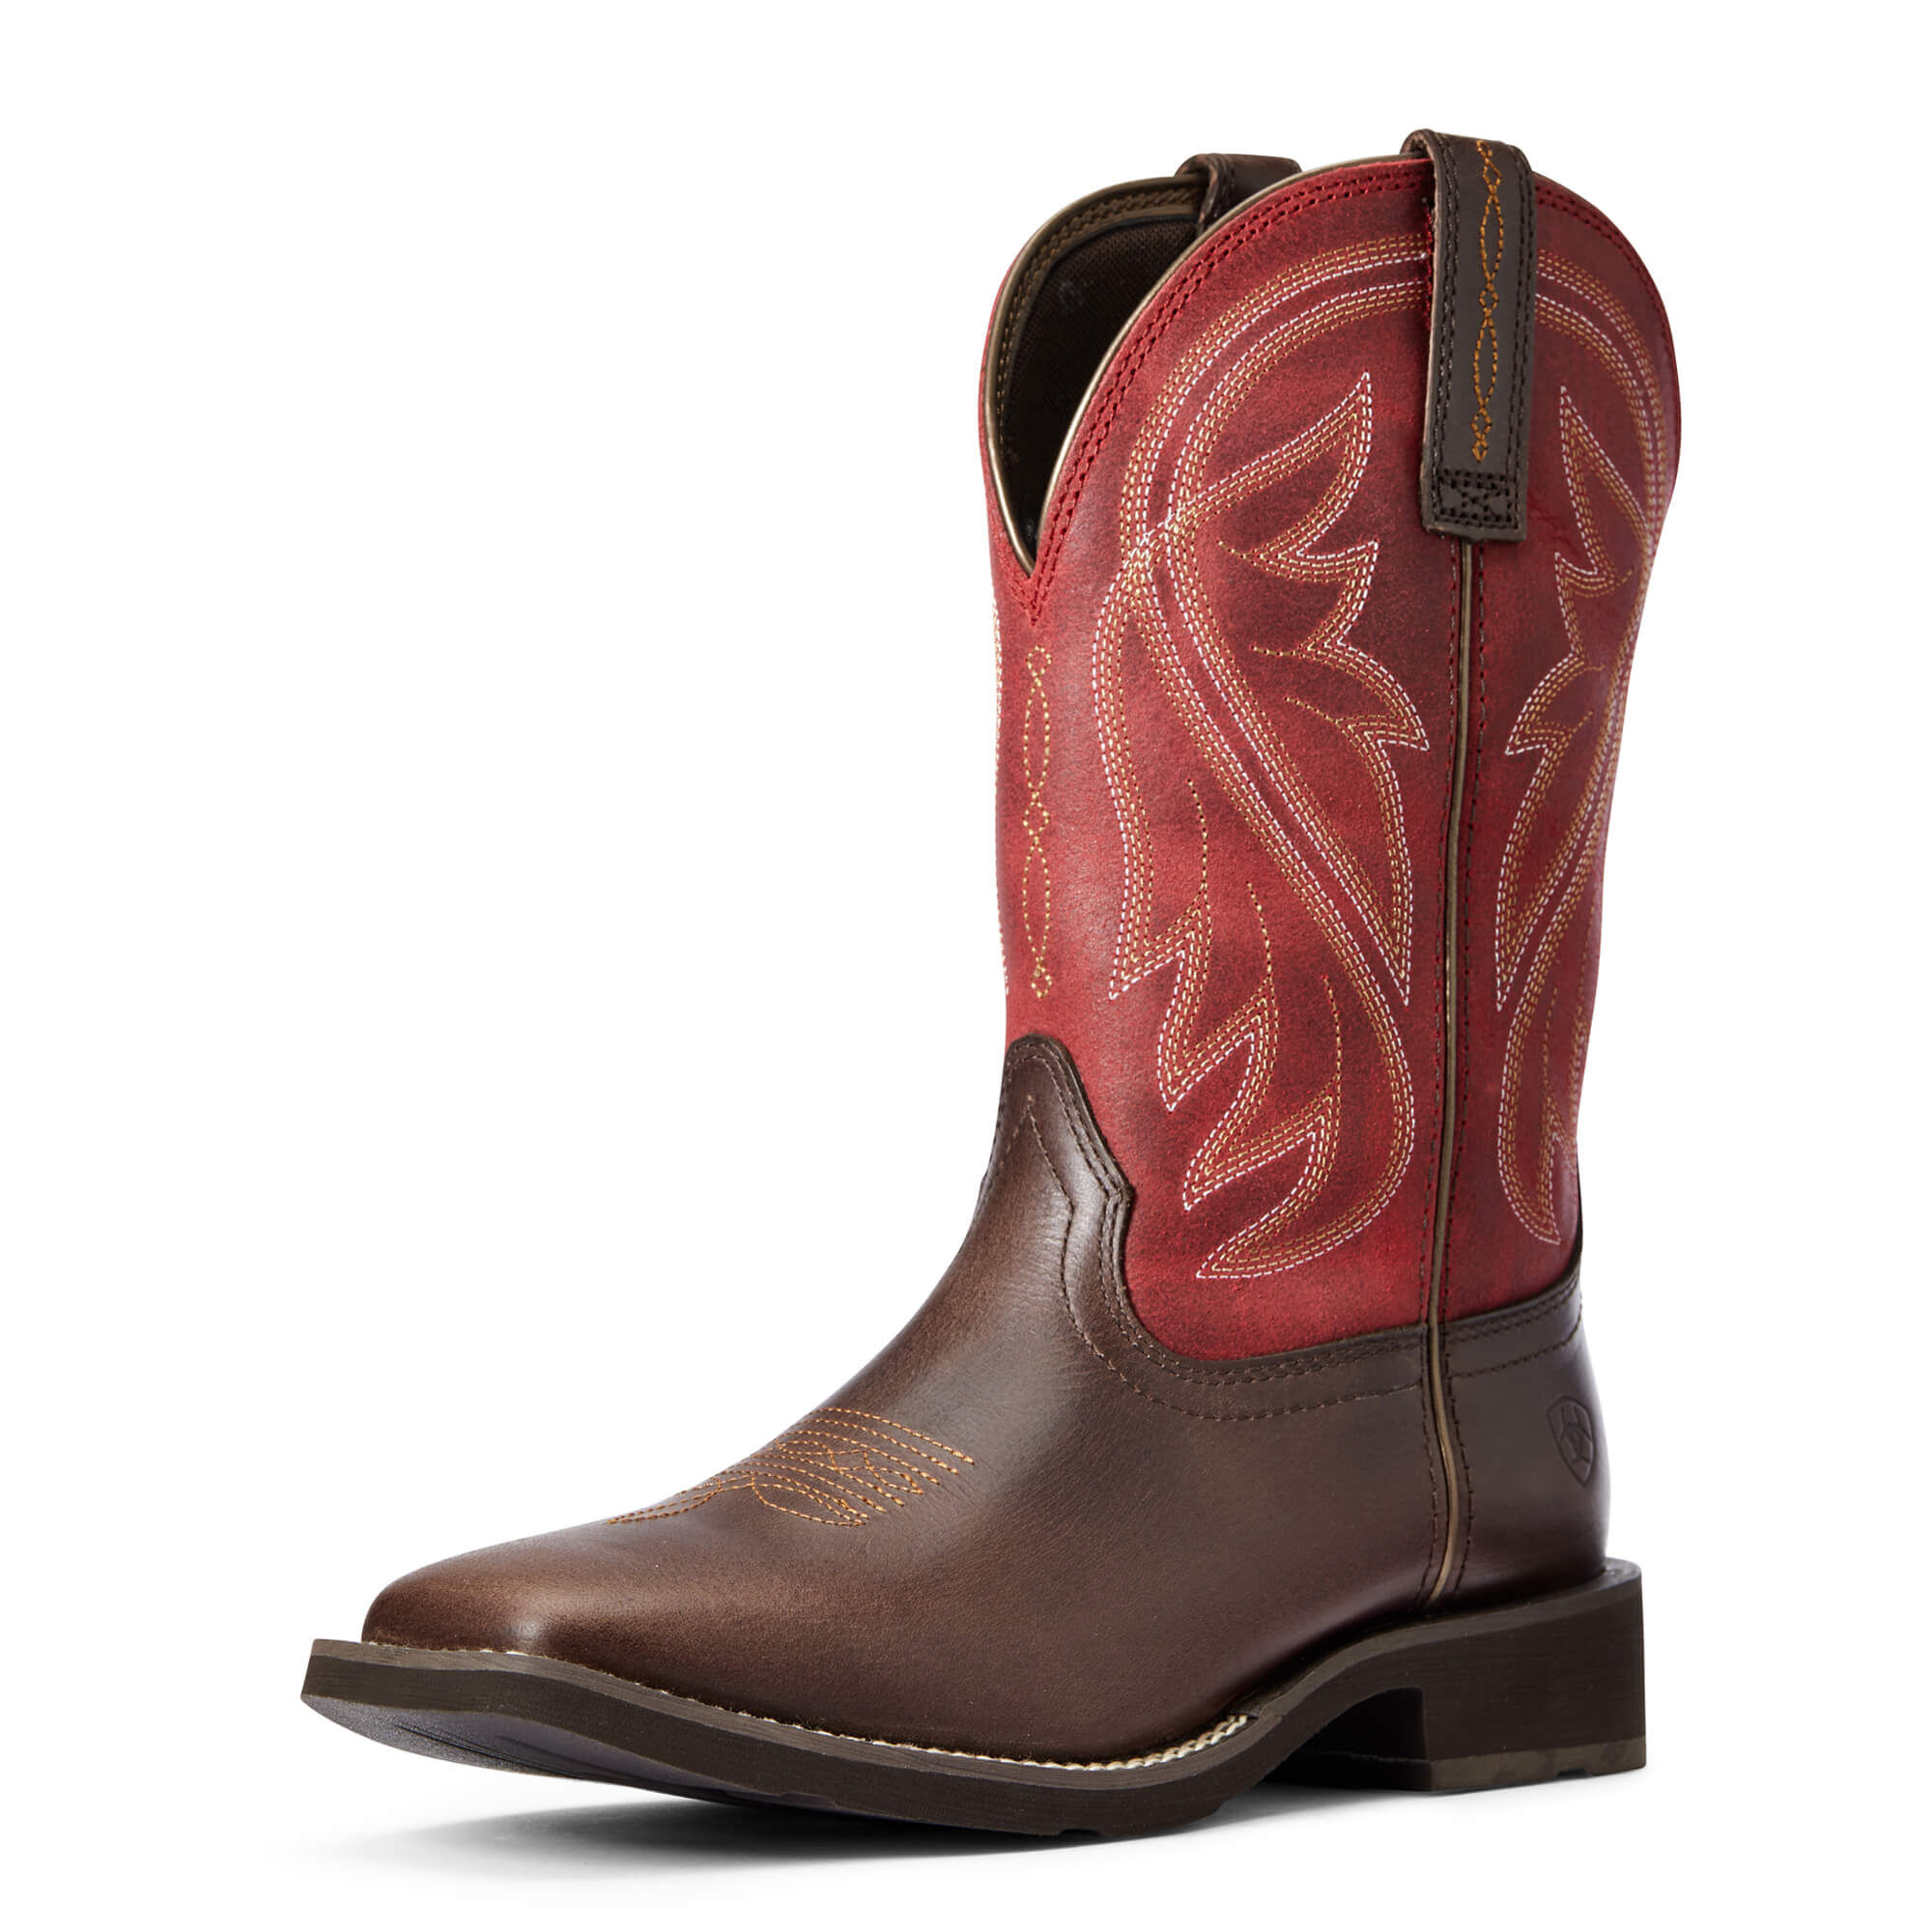 Women's Azalea Western Boots in Chocolate Leather  by Ariat